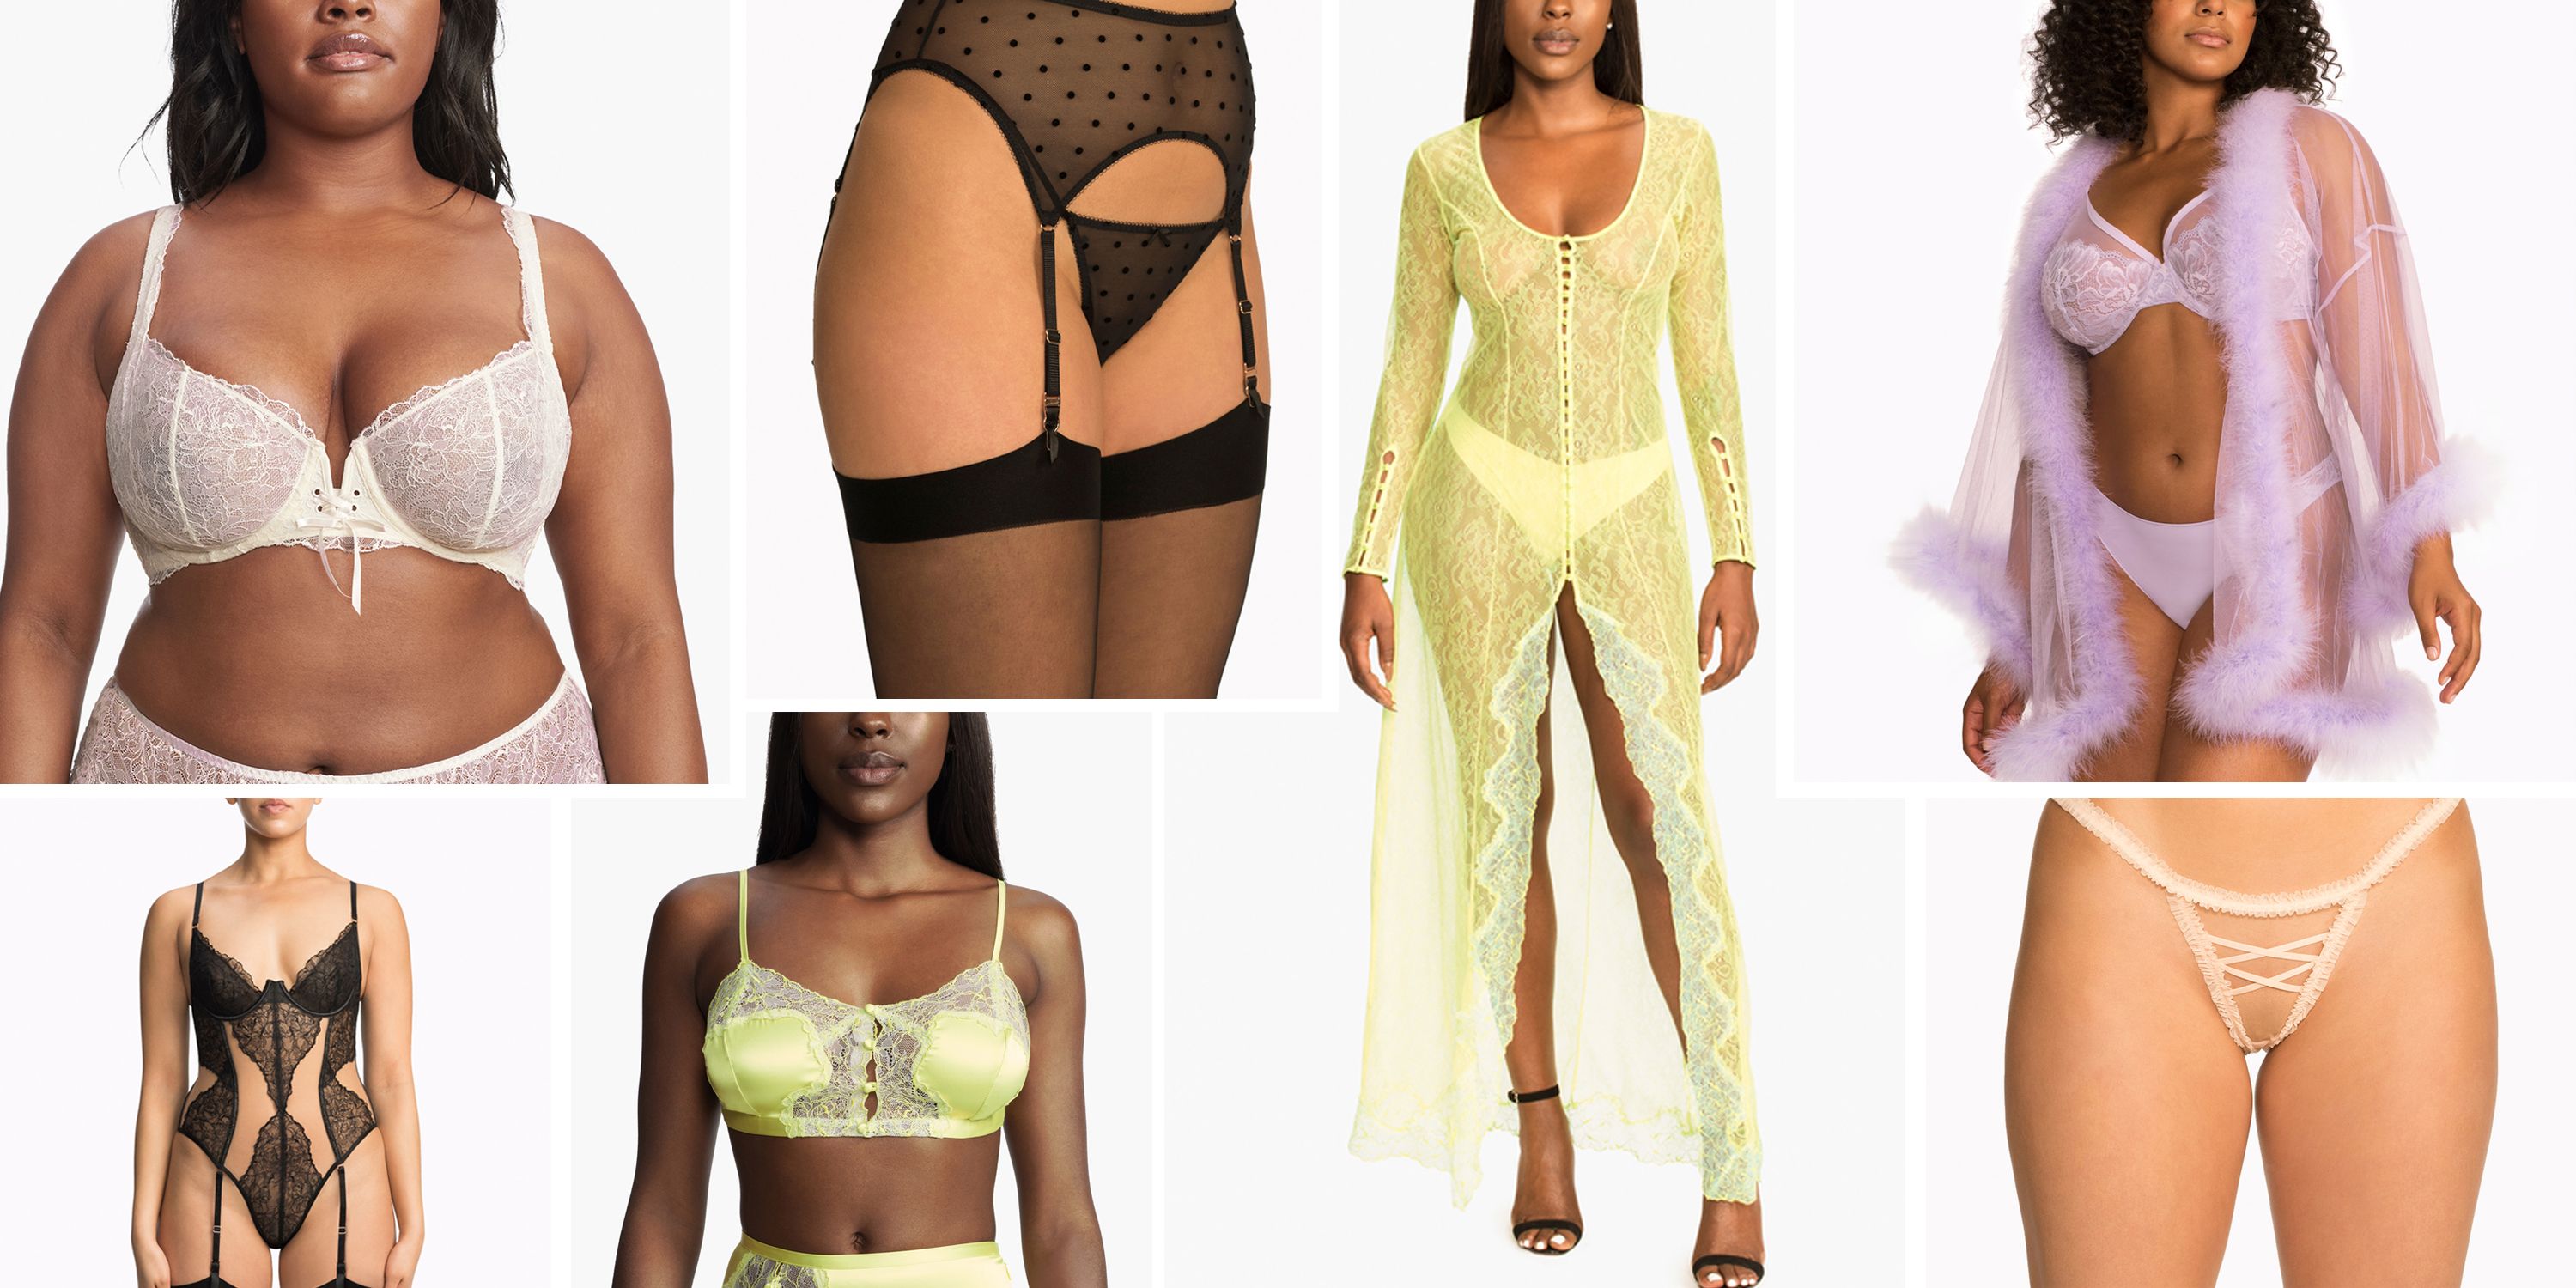 60s Lingerie Styles Are Back According to Savage X Fenty's Latest